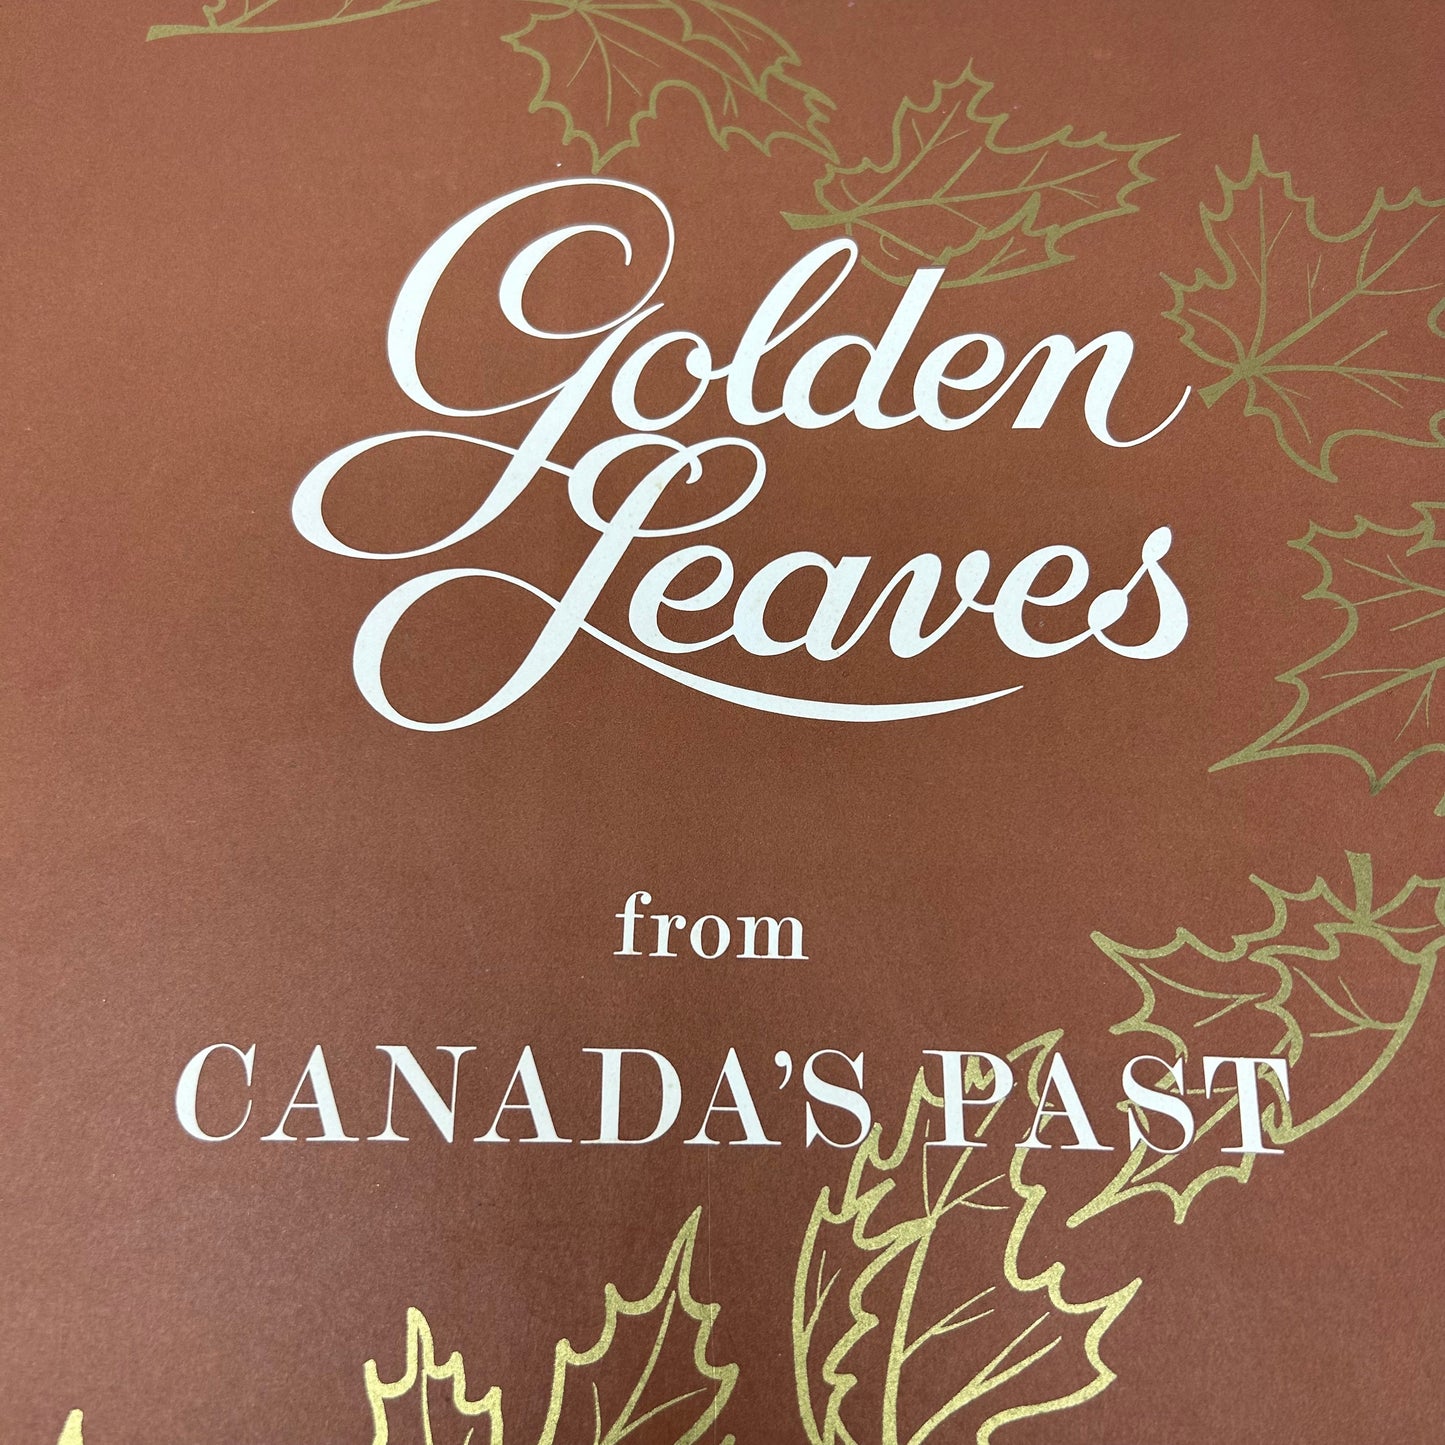 Vintage Canadian Centennial Anniversary Oversized “Golden Leaves” Book